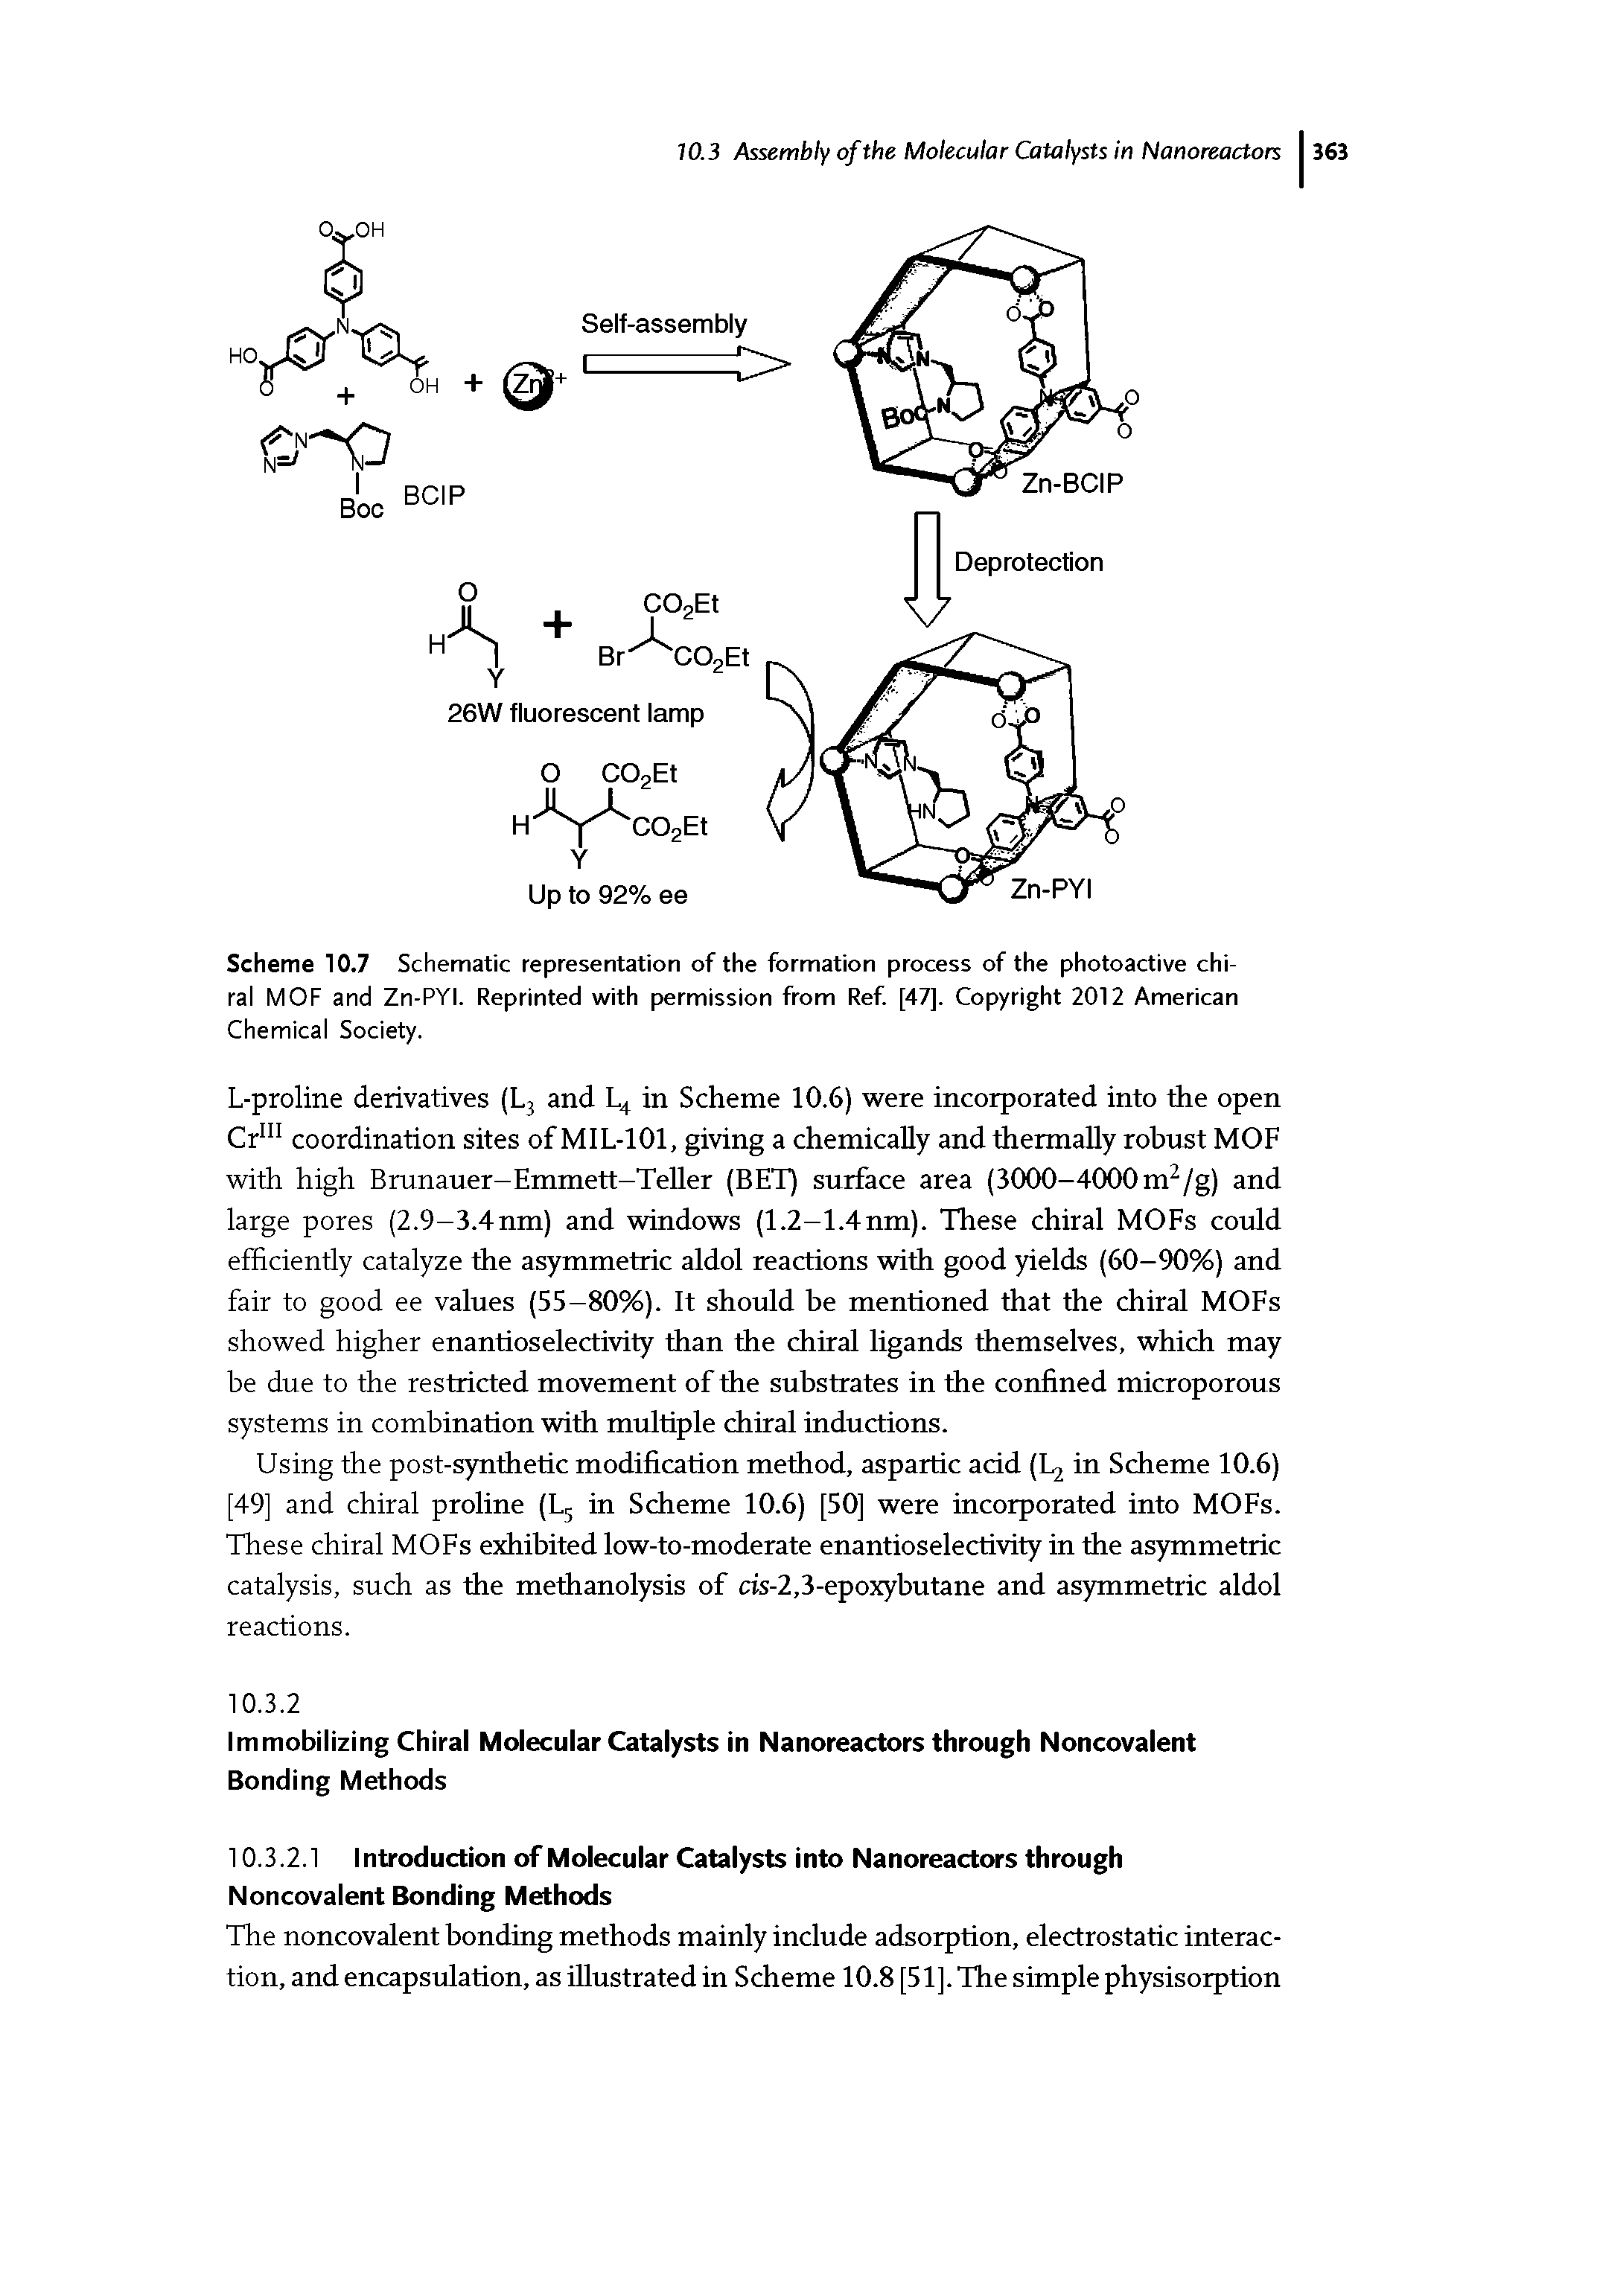 Scheme 10.7 Schematic representation of the formation process of the photoactive chiral MOF and Zn-PYI. Reprinted with permission from Ref. [47]. Copyright 2012 American...